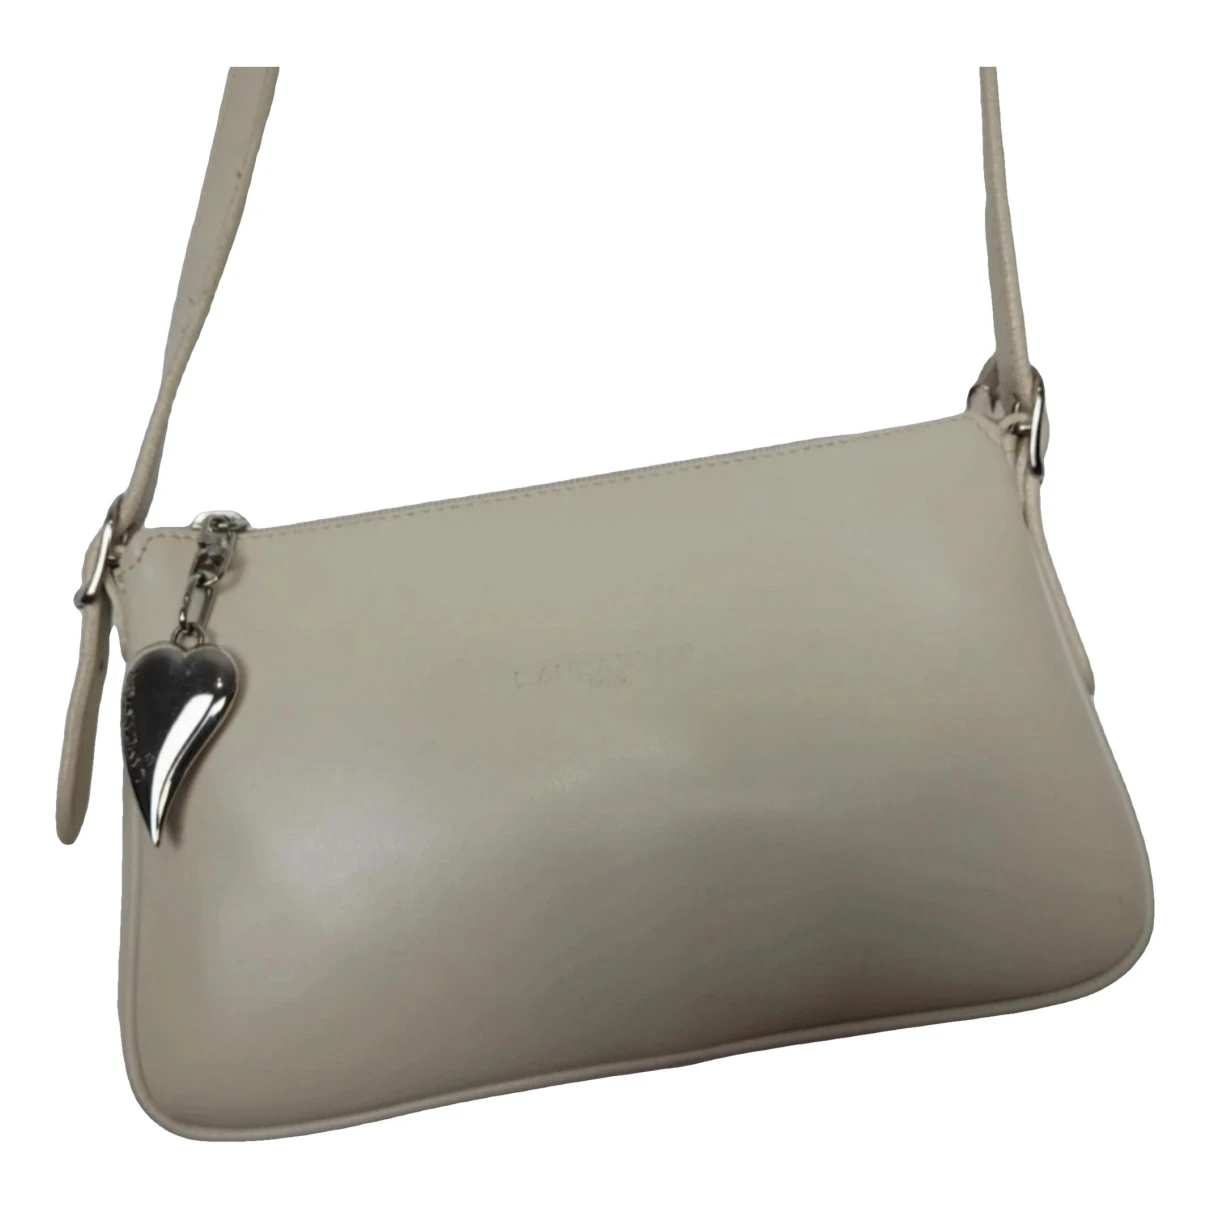 Pre-owned Lancaster Patent Leather Handbag In Beige